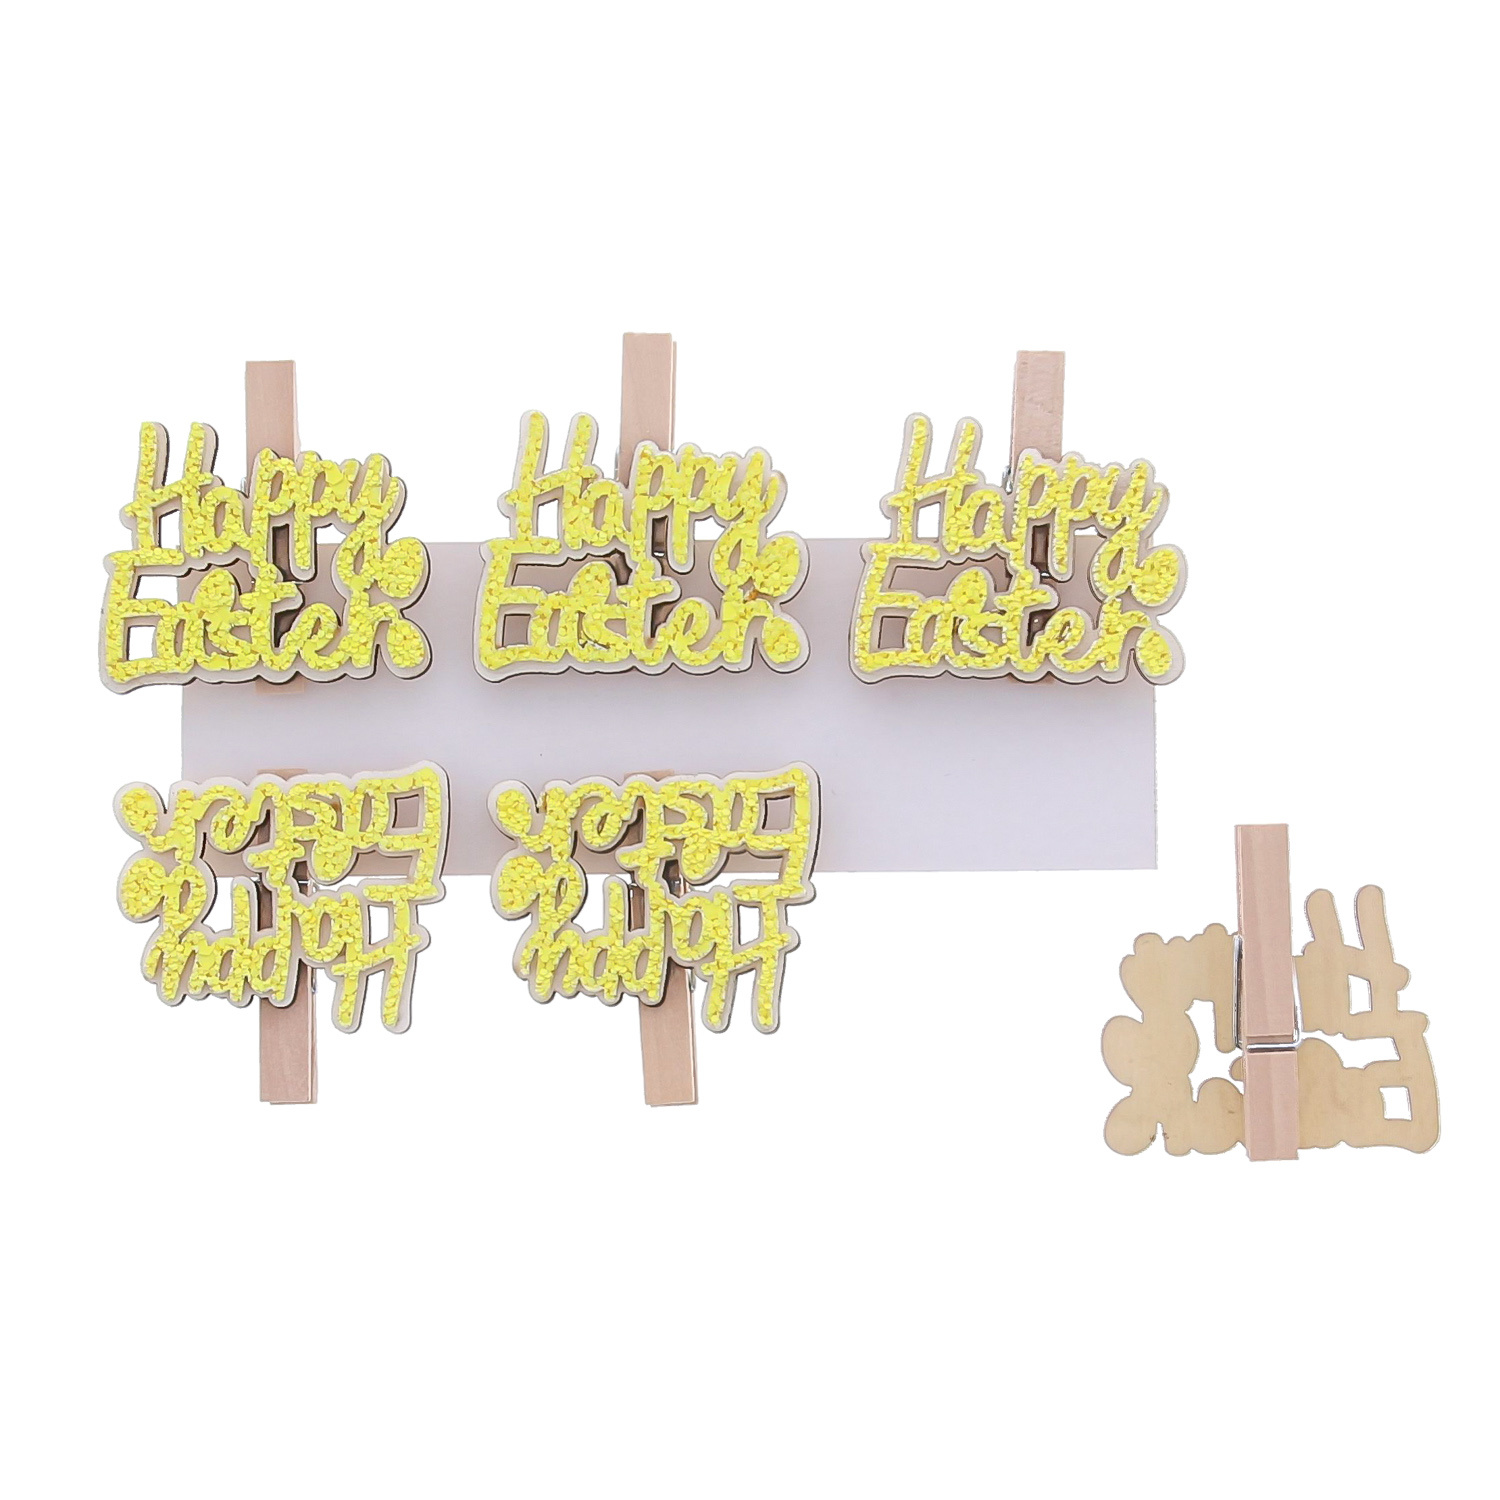 "Happy Easter" clip yellow 45*14*48mm- 36 pieces